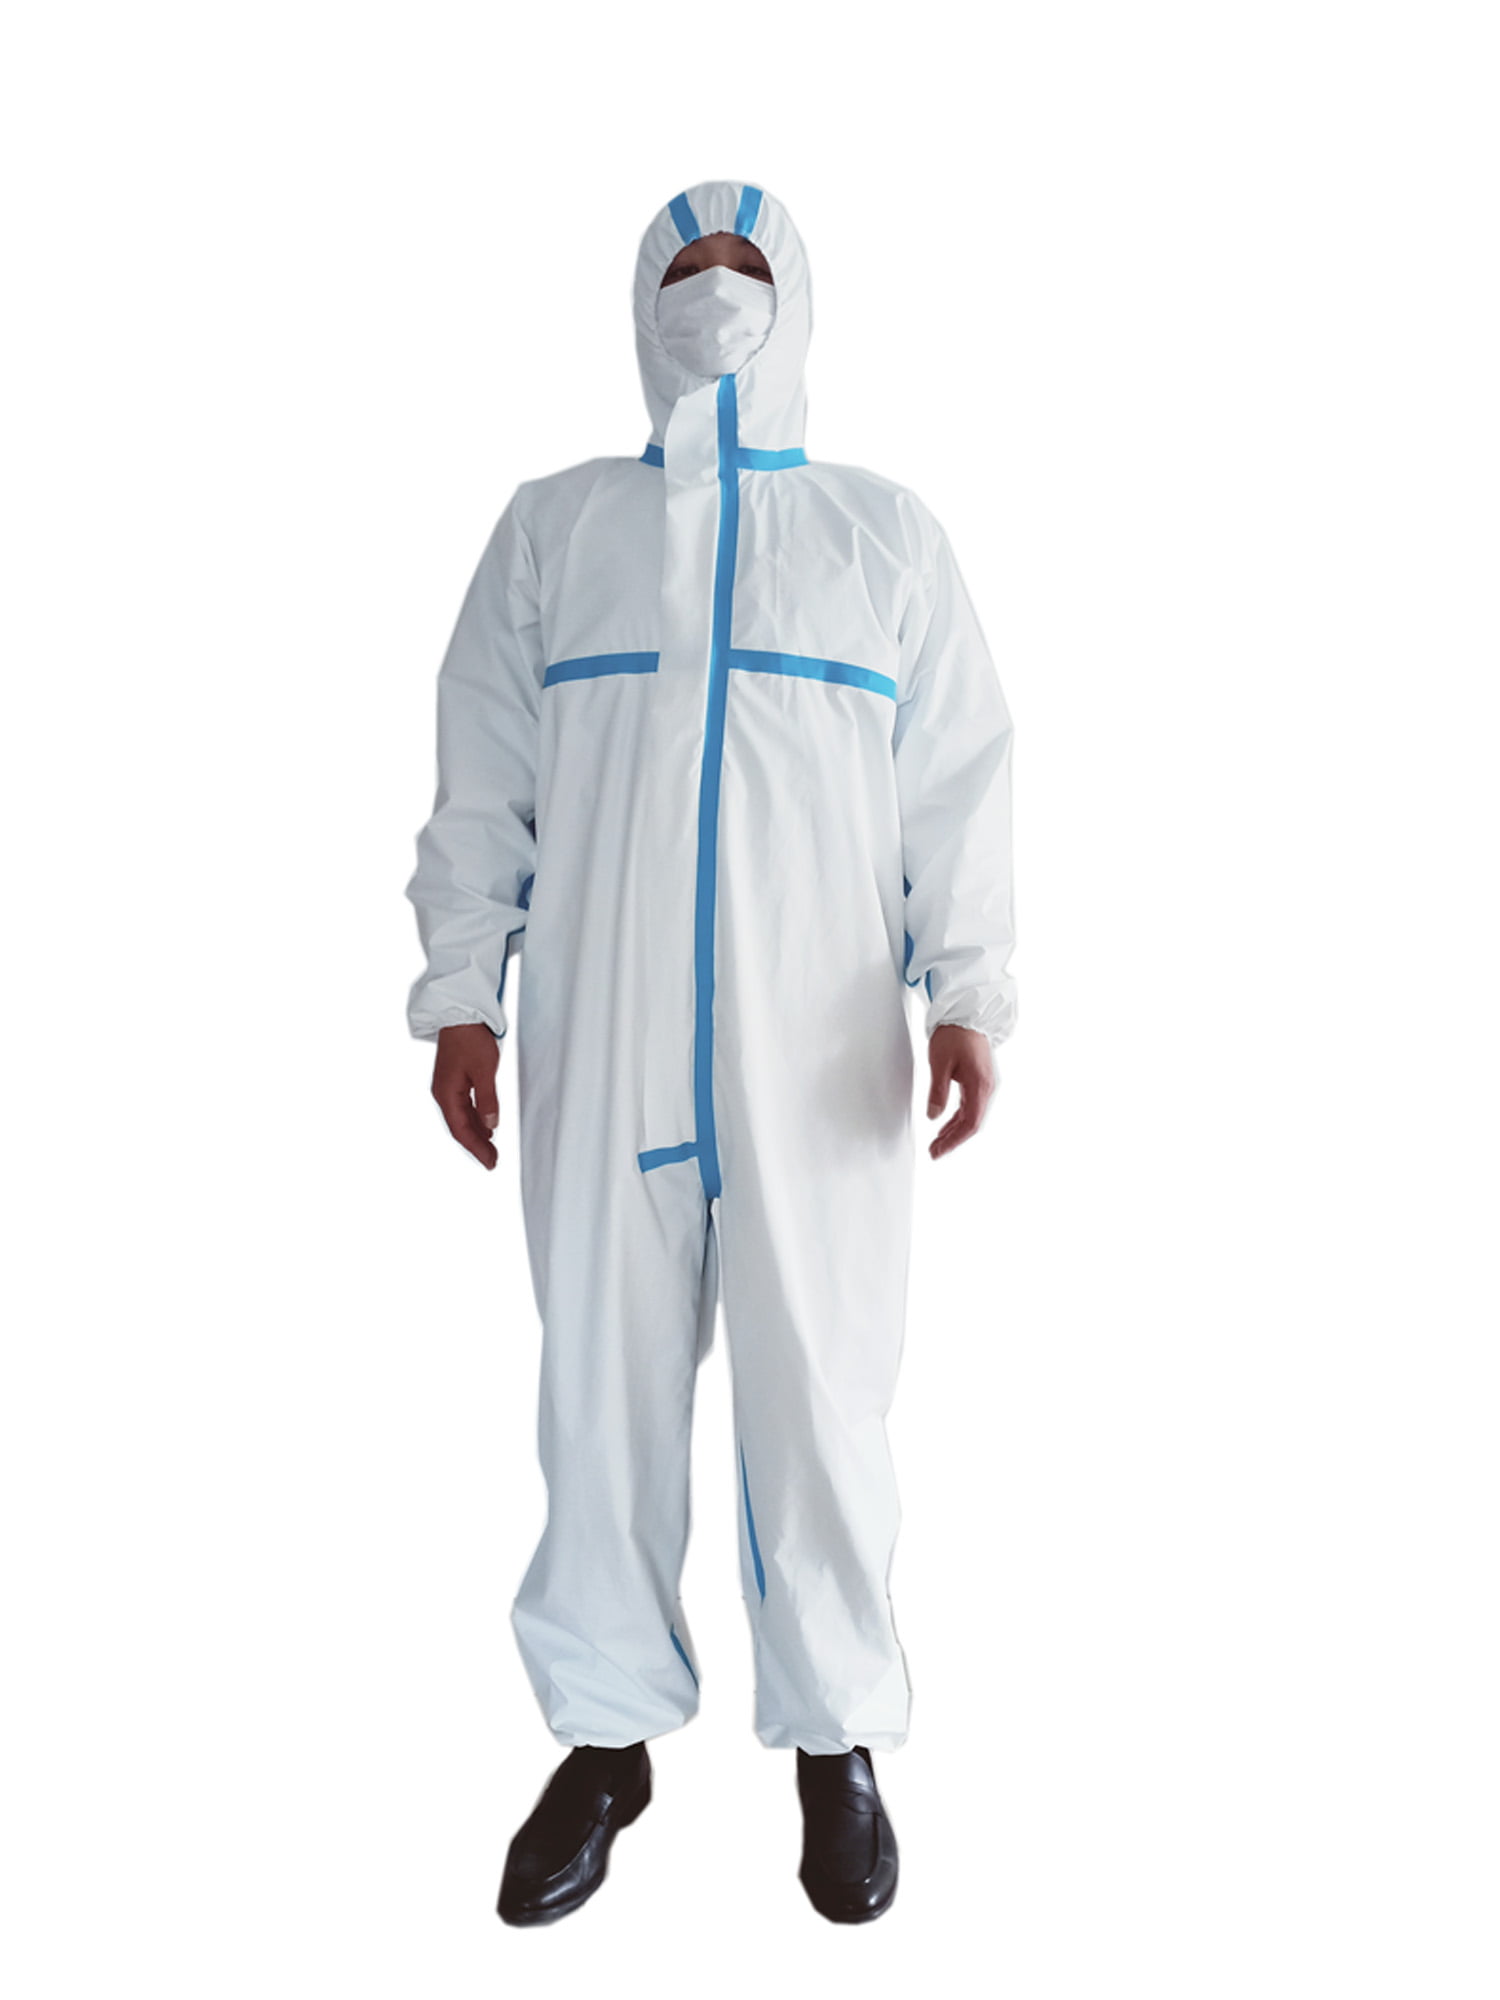 Details about   Hazmat Suit Anti-Virus Protection Clothing Safety Coverall Disposable Healthcare 